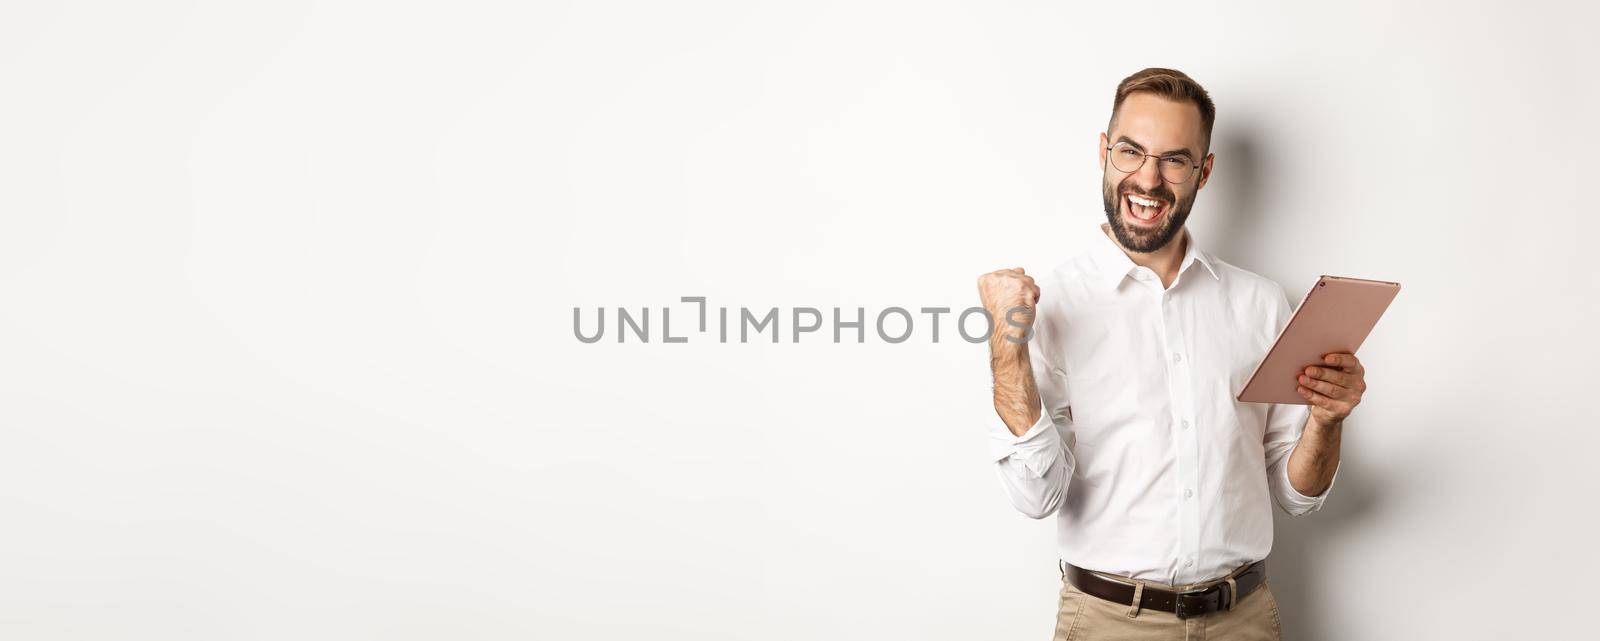 Successful businessman rejoicing on winning online, reading on digital tablet and making fist pump, triumphing, standing over white background.